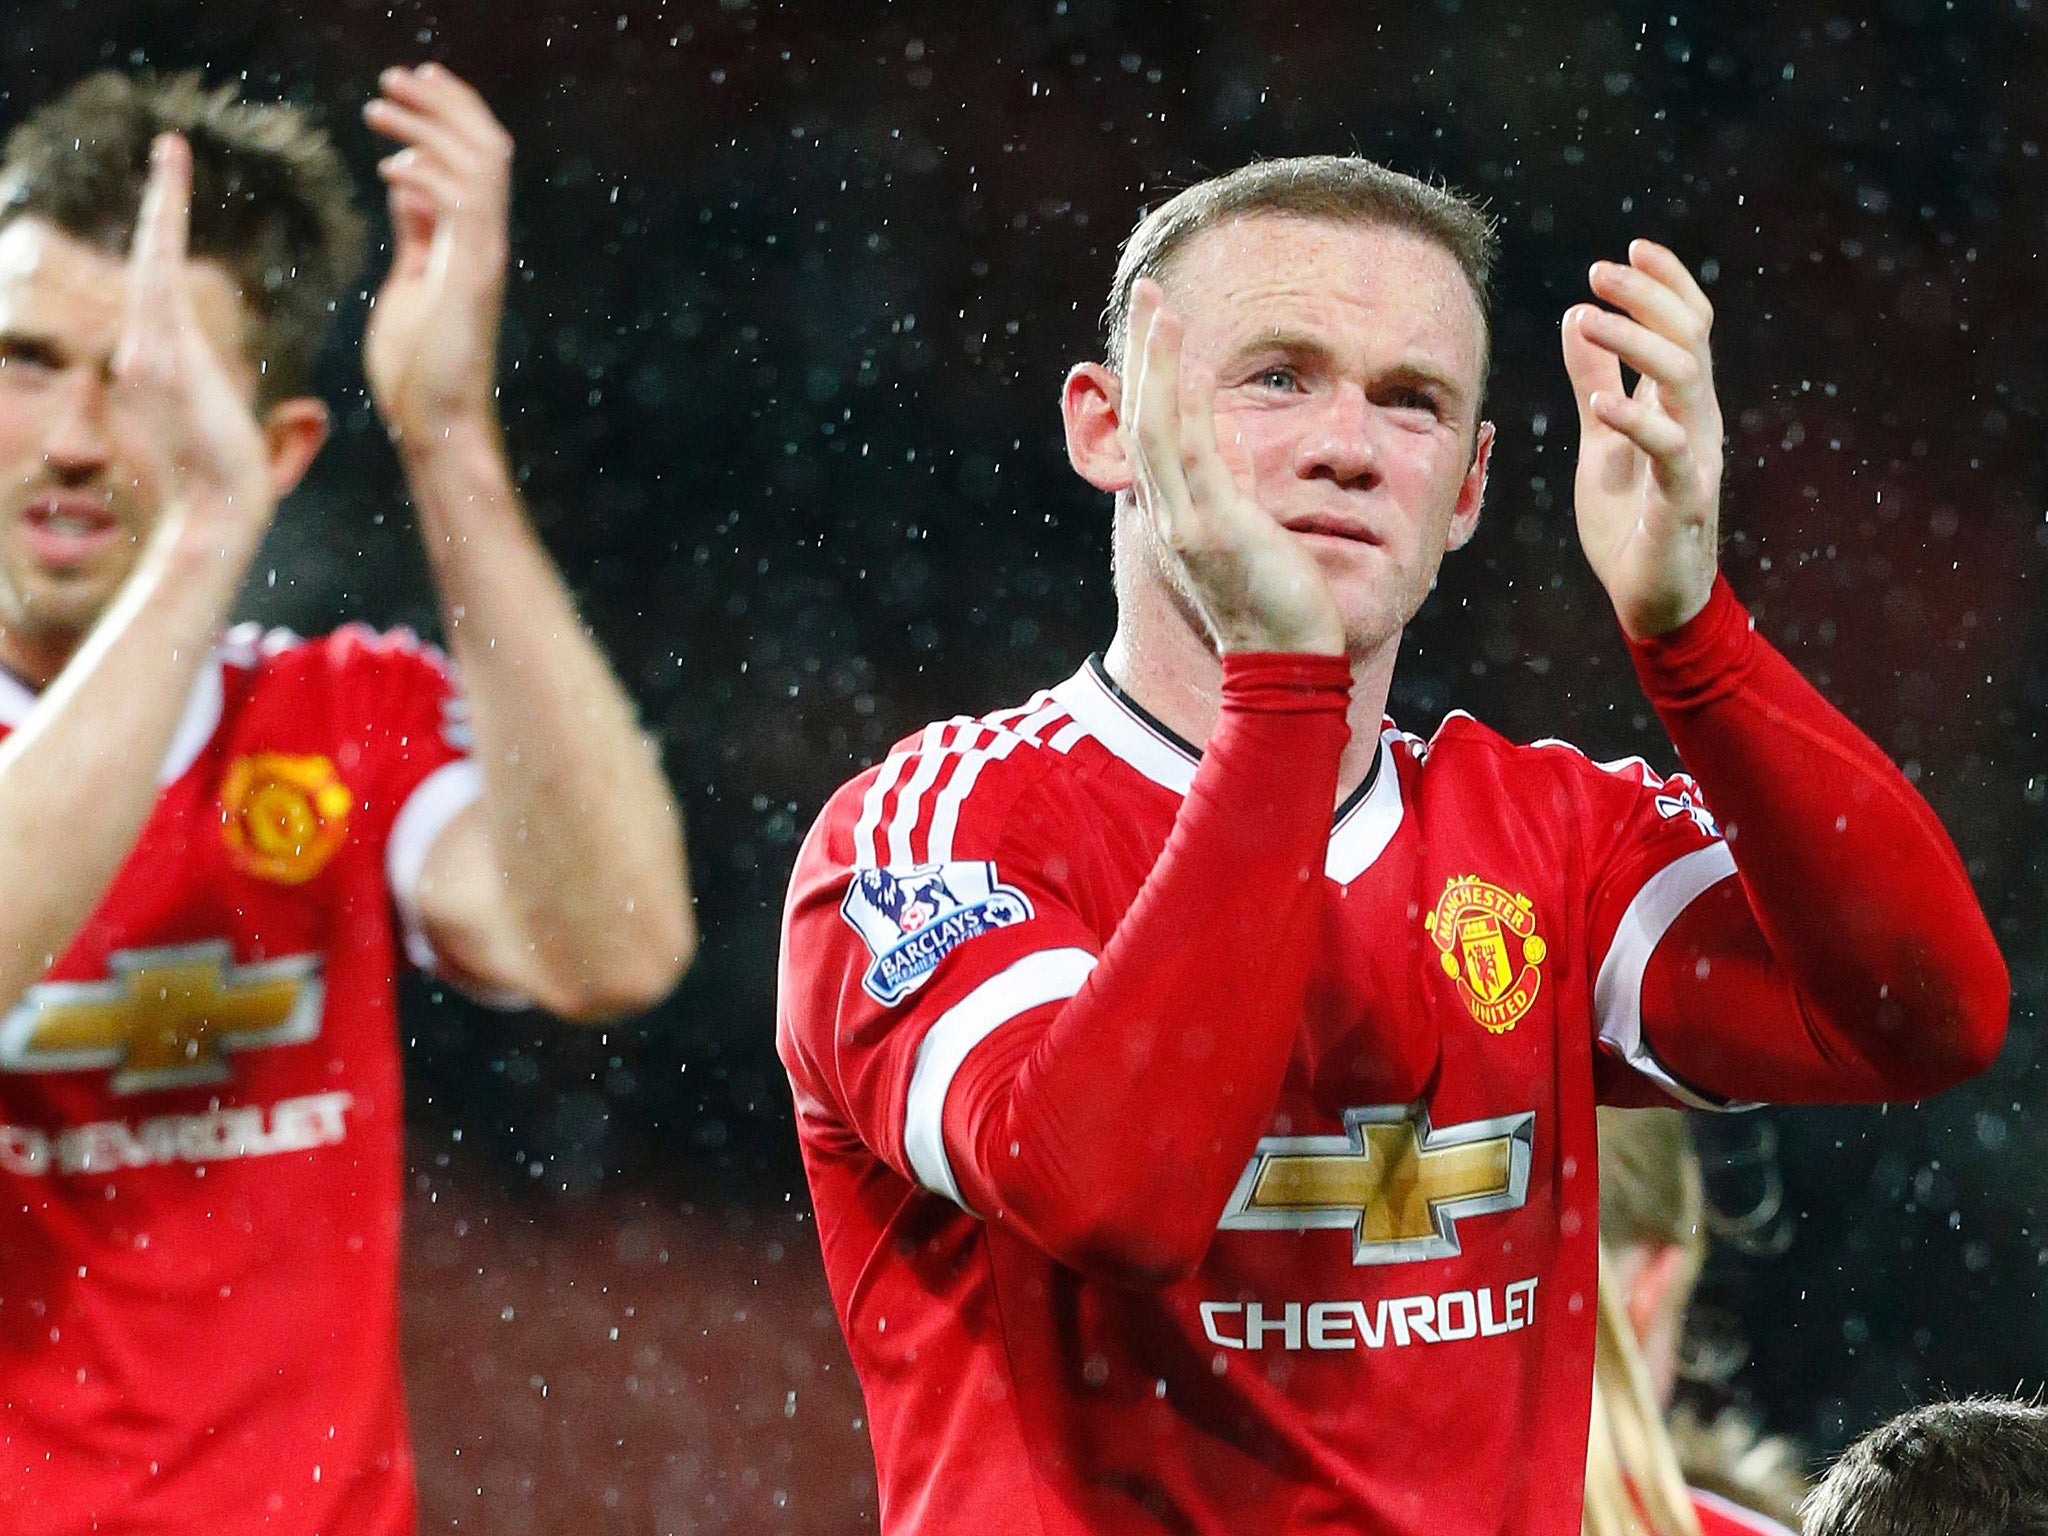 Wayne Rooney looks set for a future in midfield at Manchester United